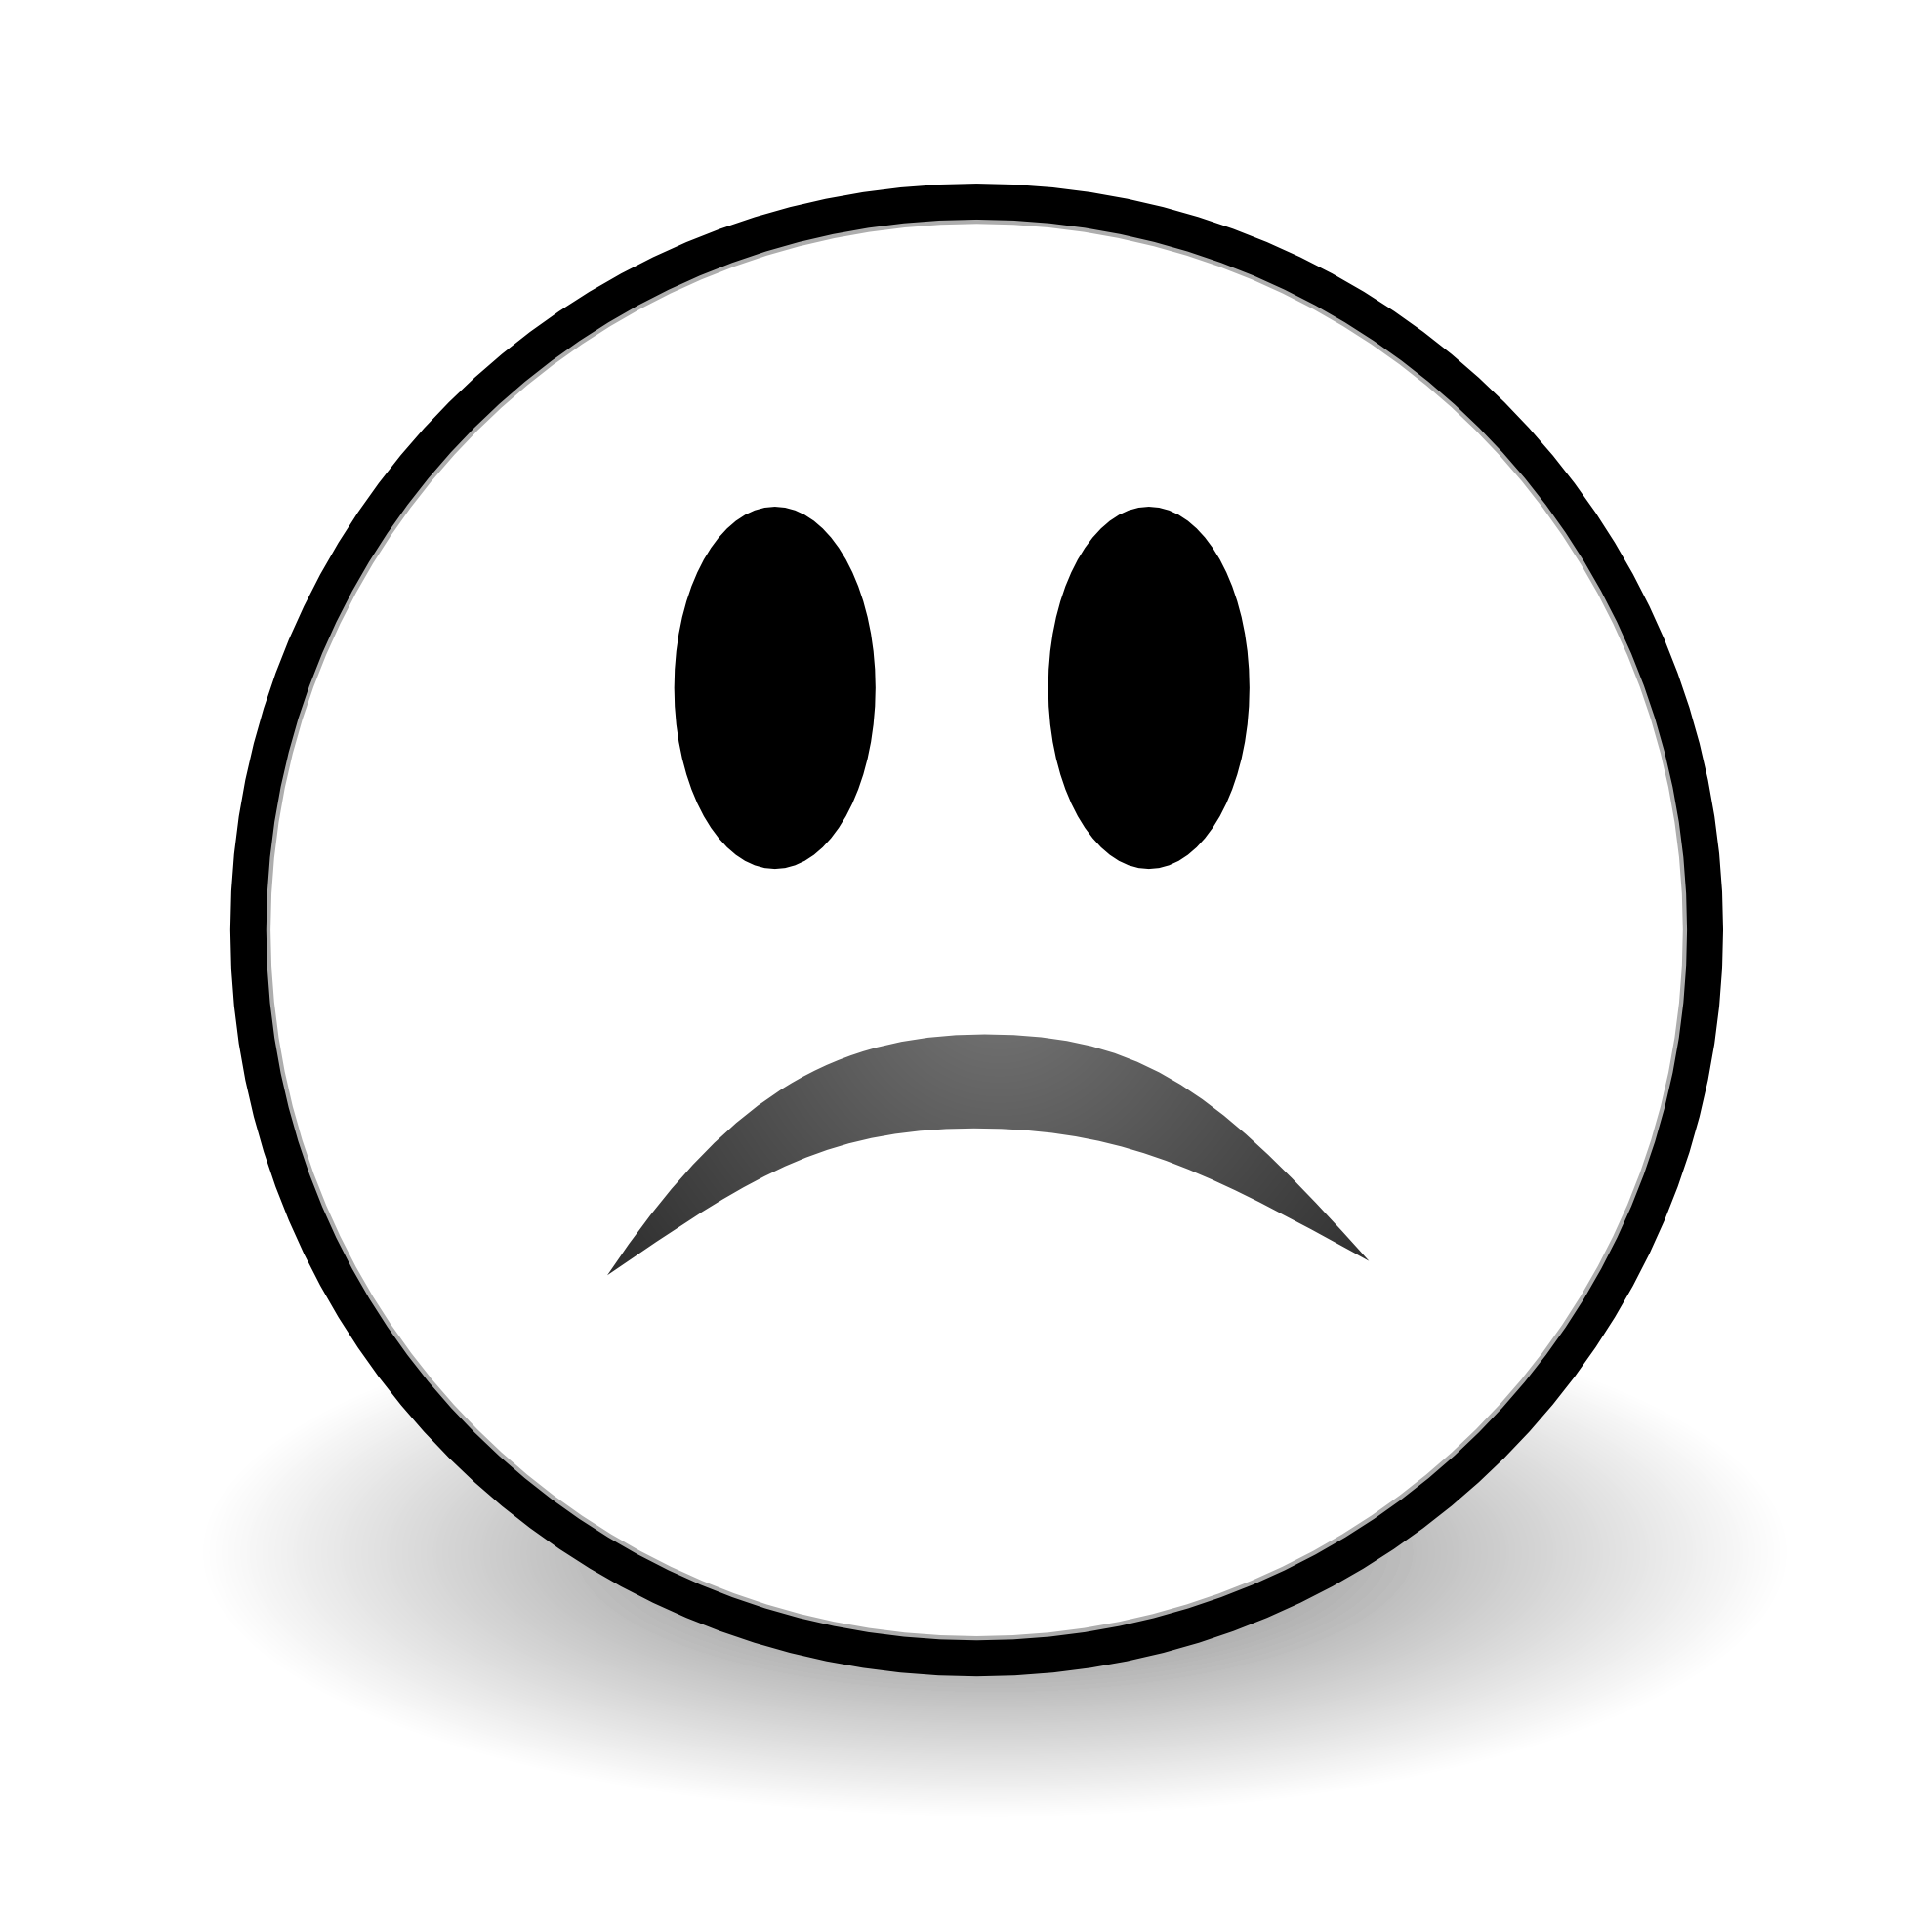 Free Sad Black And White Drawings Download Free Clip Art Free Clip Art On Clipart Library